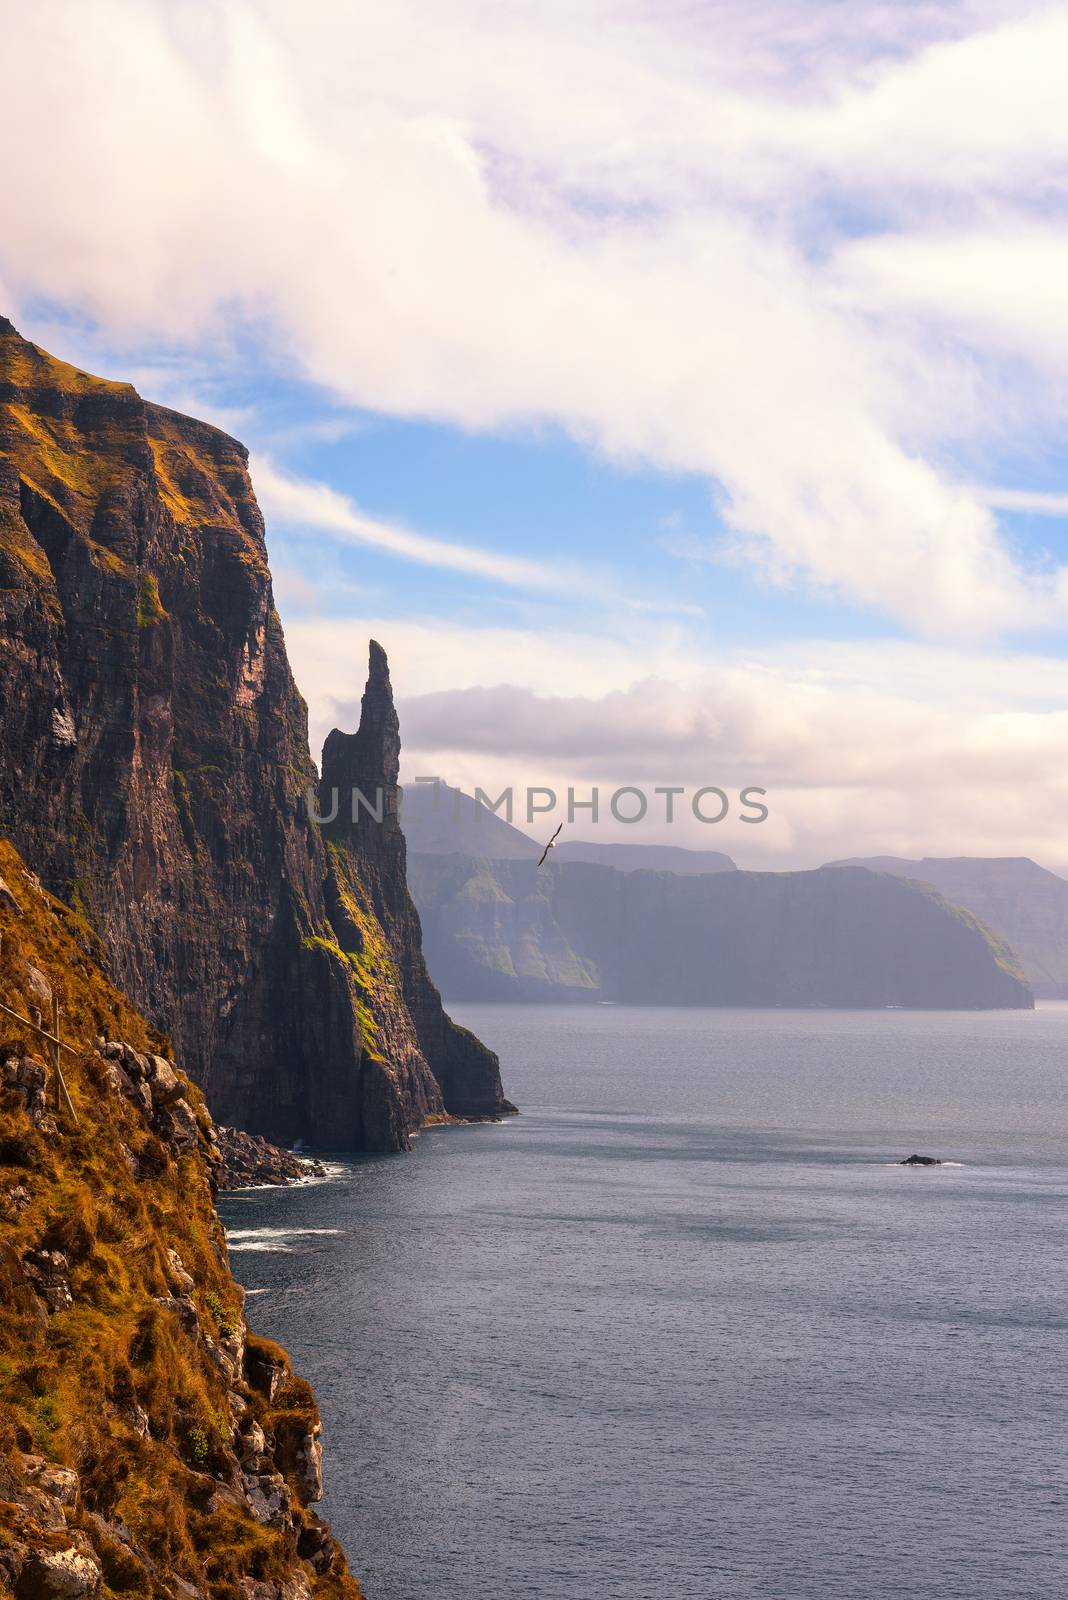 Trollkonufingur, also called The Witch's Finger on Faroe Islands by nickfox